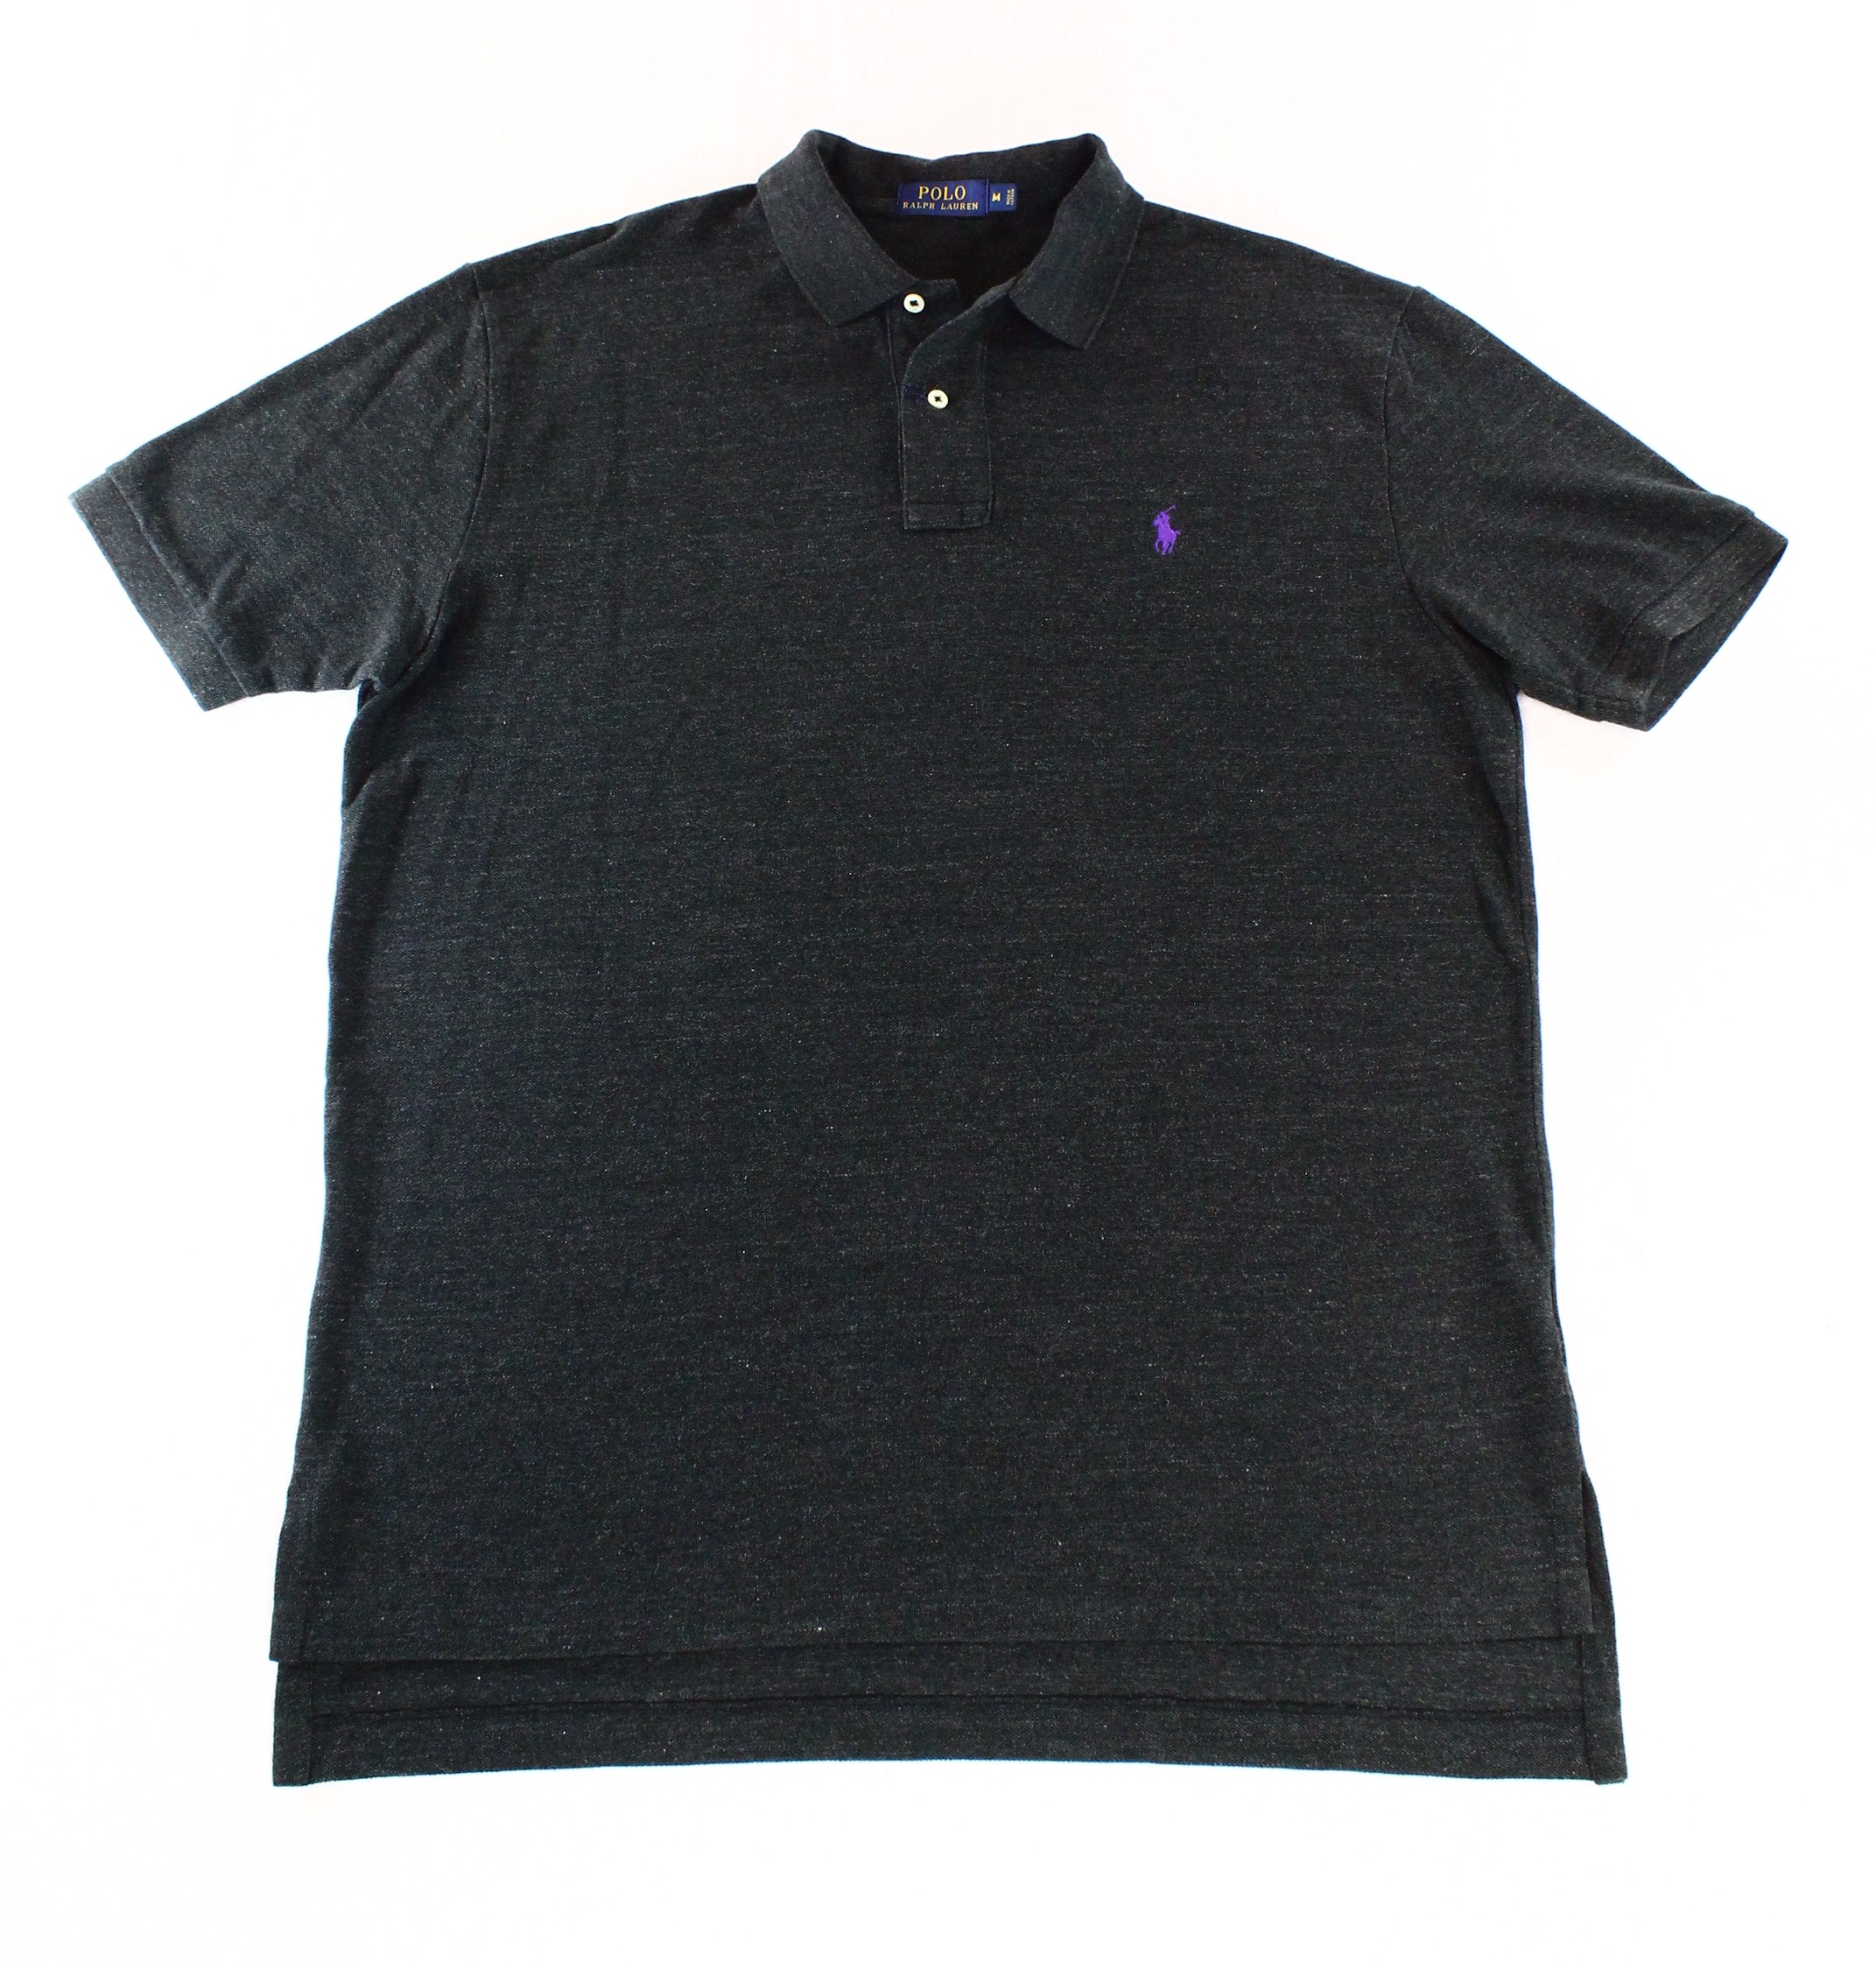 Polo Ralph Lauren NEW Black Mens Size Medium M Mesh Knit Polo Rugby Shirt $89 - image 1 of 2